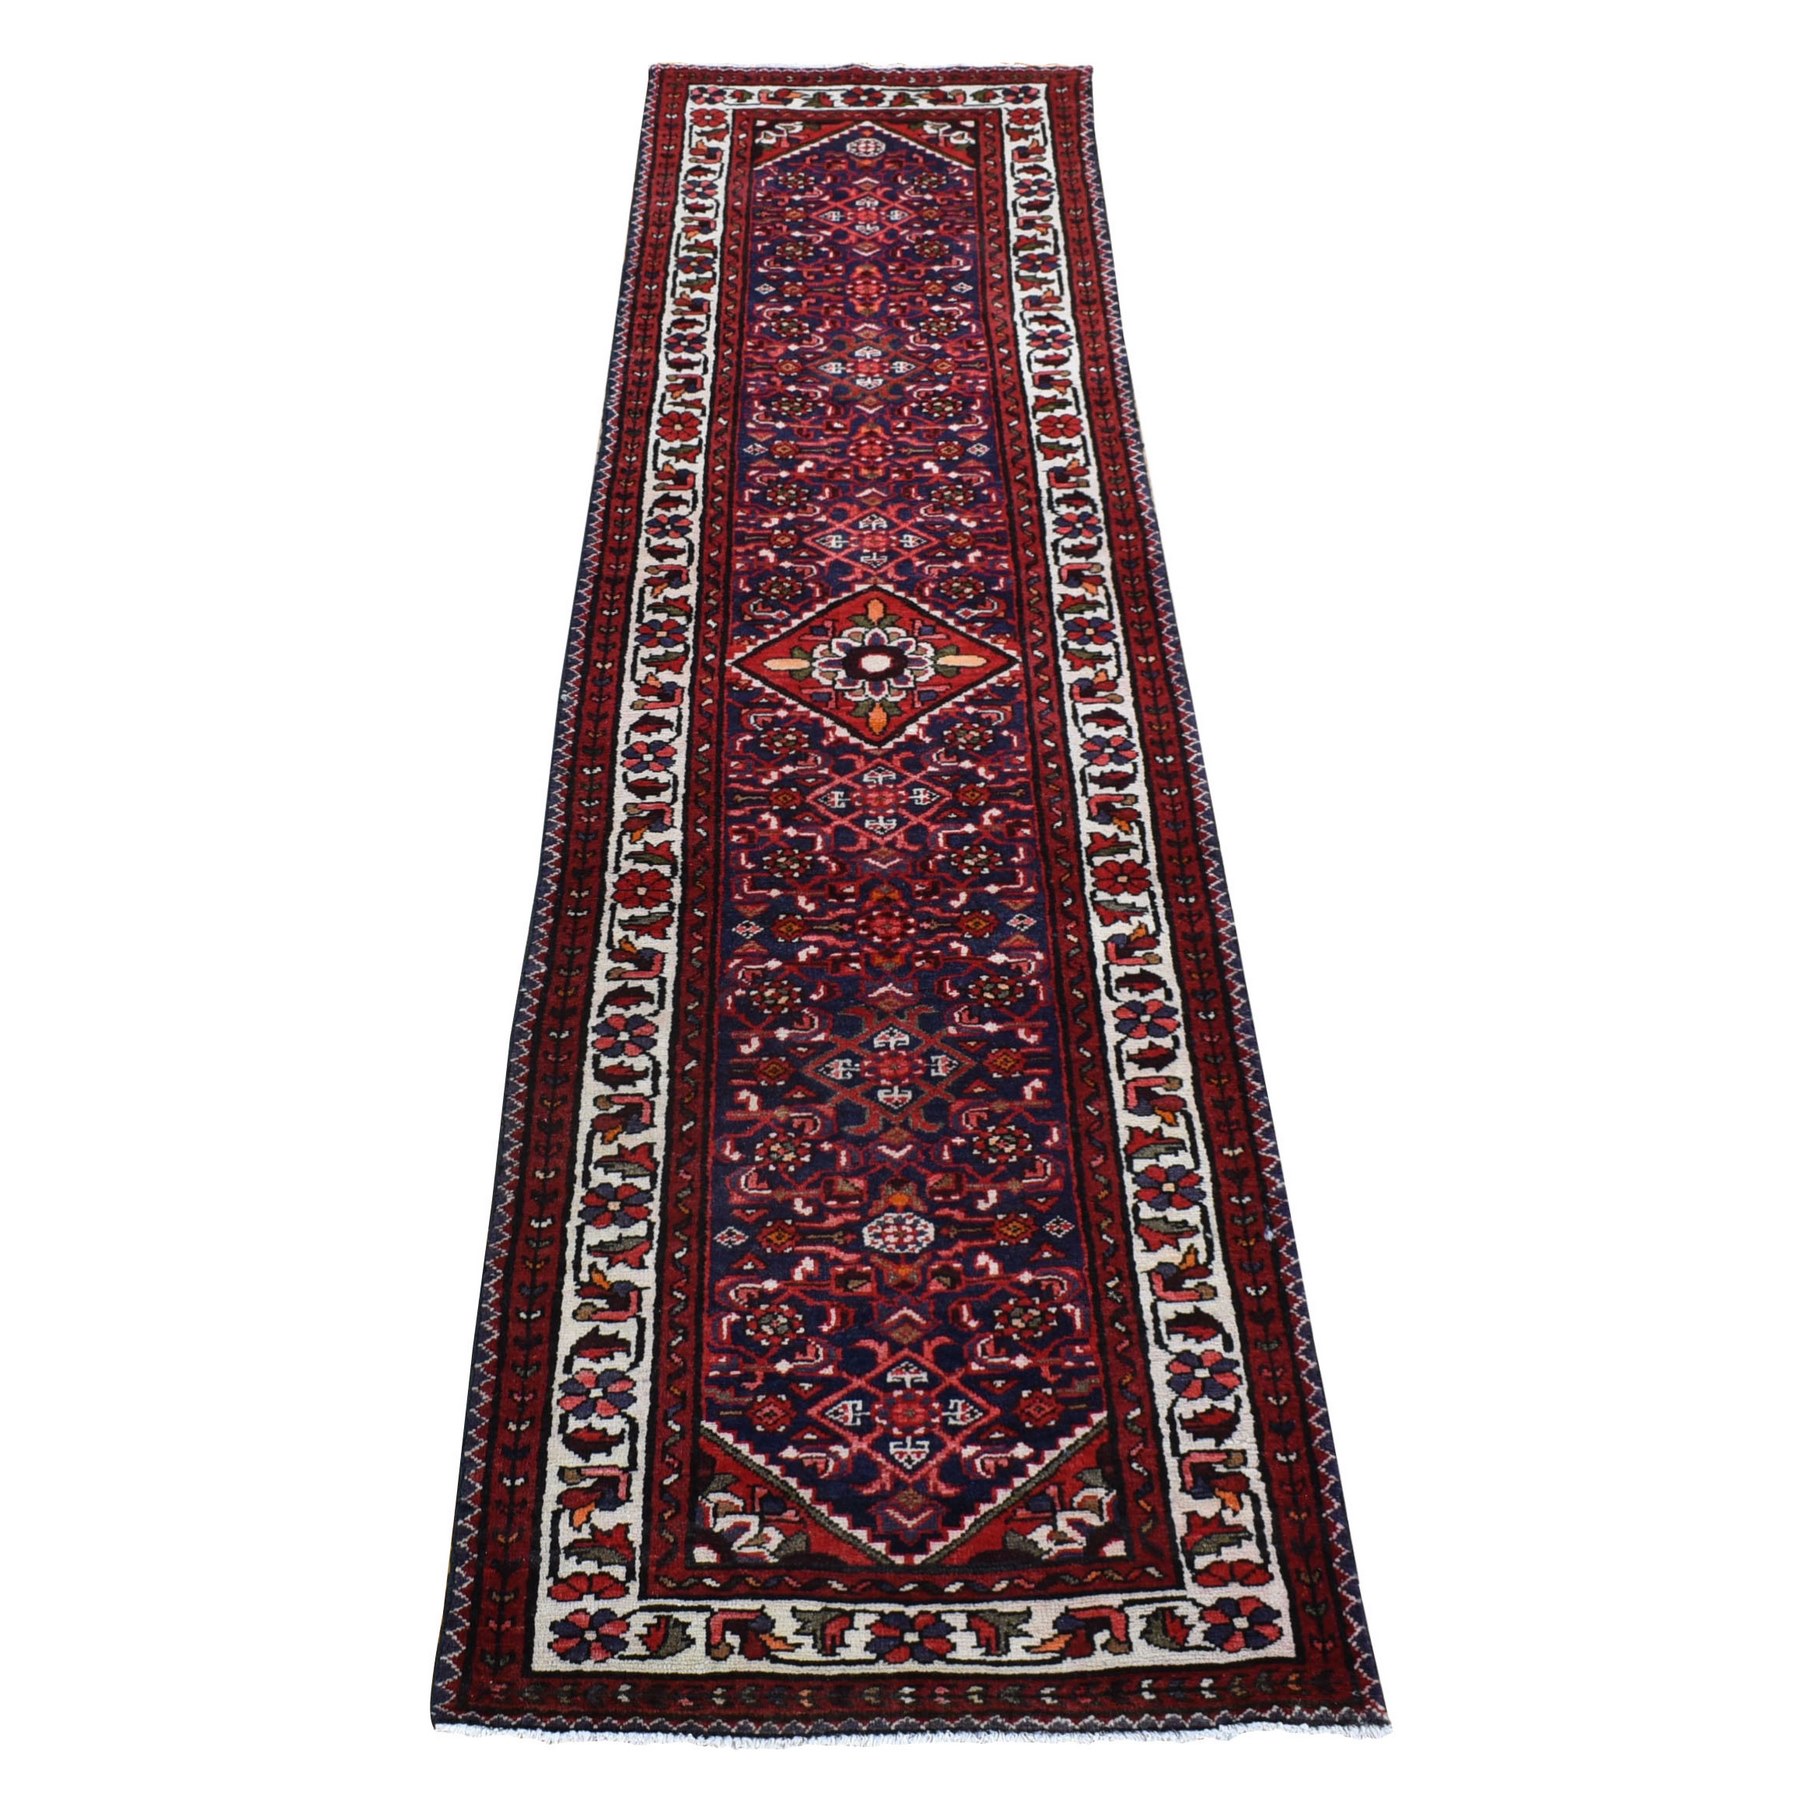 2'7"x10' Navy Blue with Mix of Red, Vintage Persian Bakhtiari Abrash Full Pile, Hand Woven Pure Wool, Runner Oriental Rug 